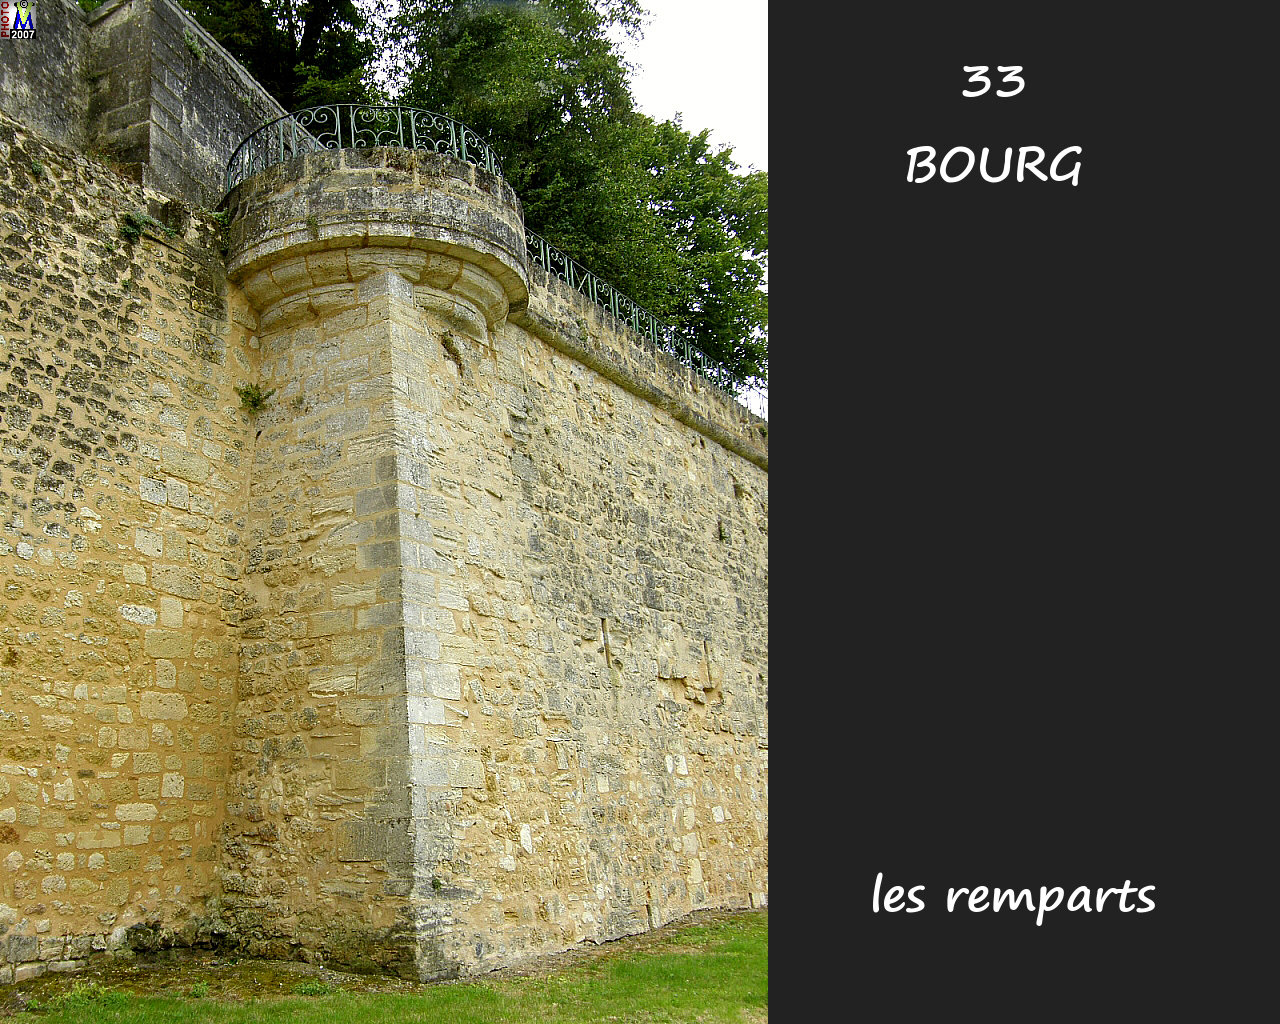 33BOURG_remparts_106.jpg